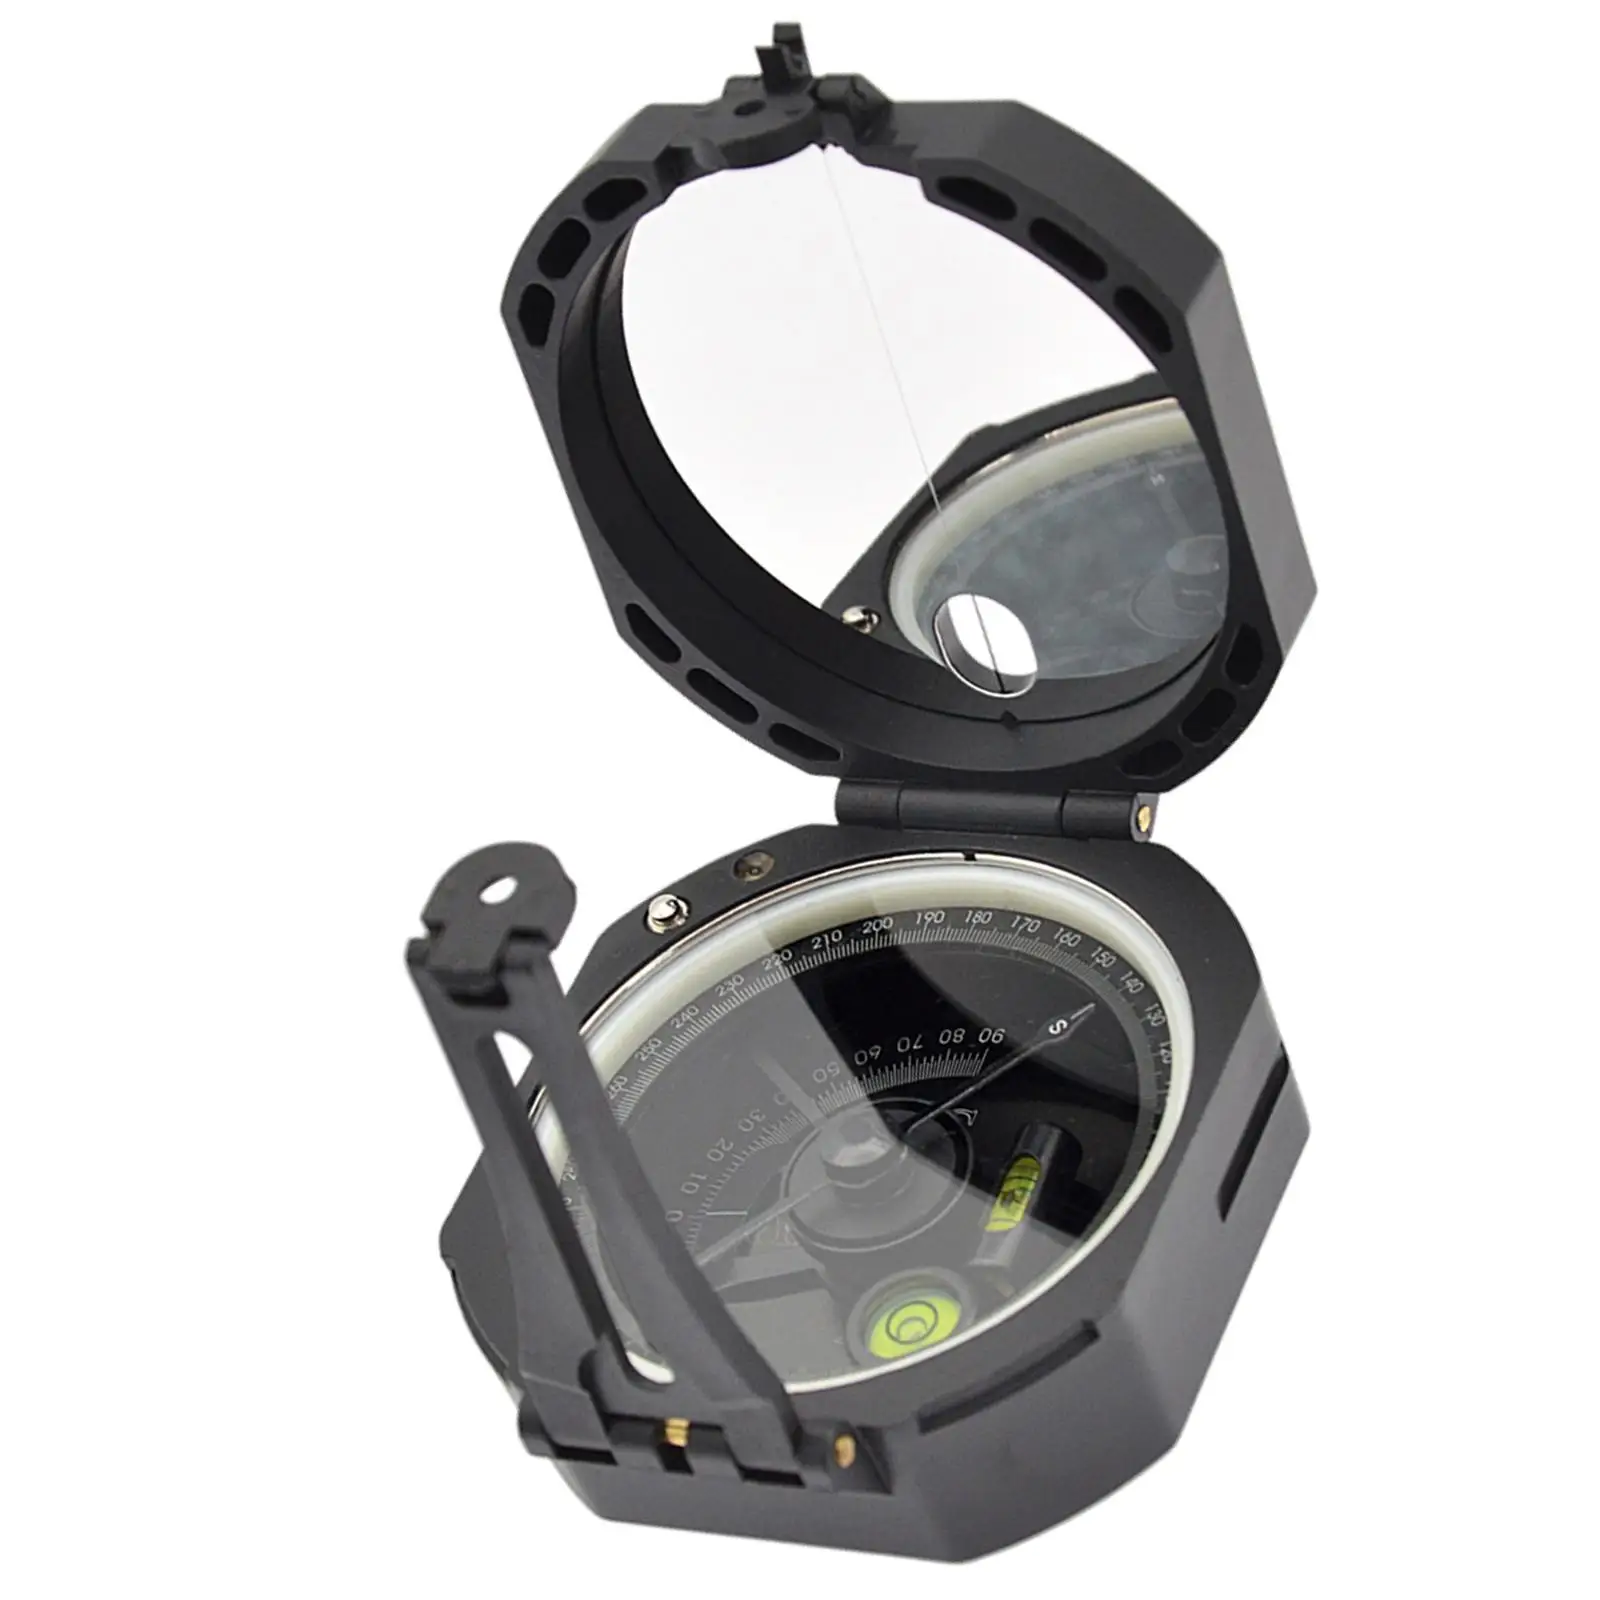 Multifunction Camping Compass Mirror with Carrying Bag Fluorescent Adjustable Declination for Navigation Fishing Hiking Hunting